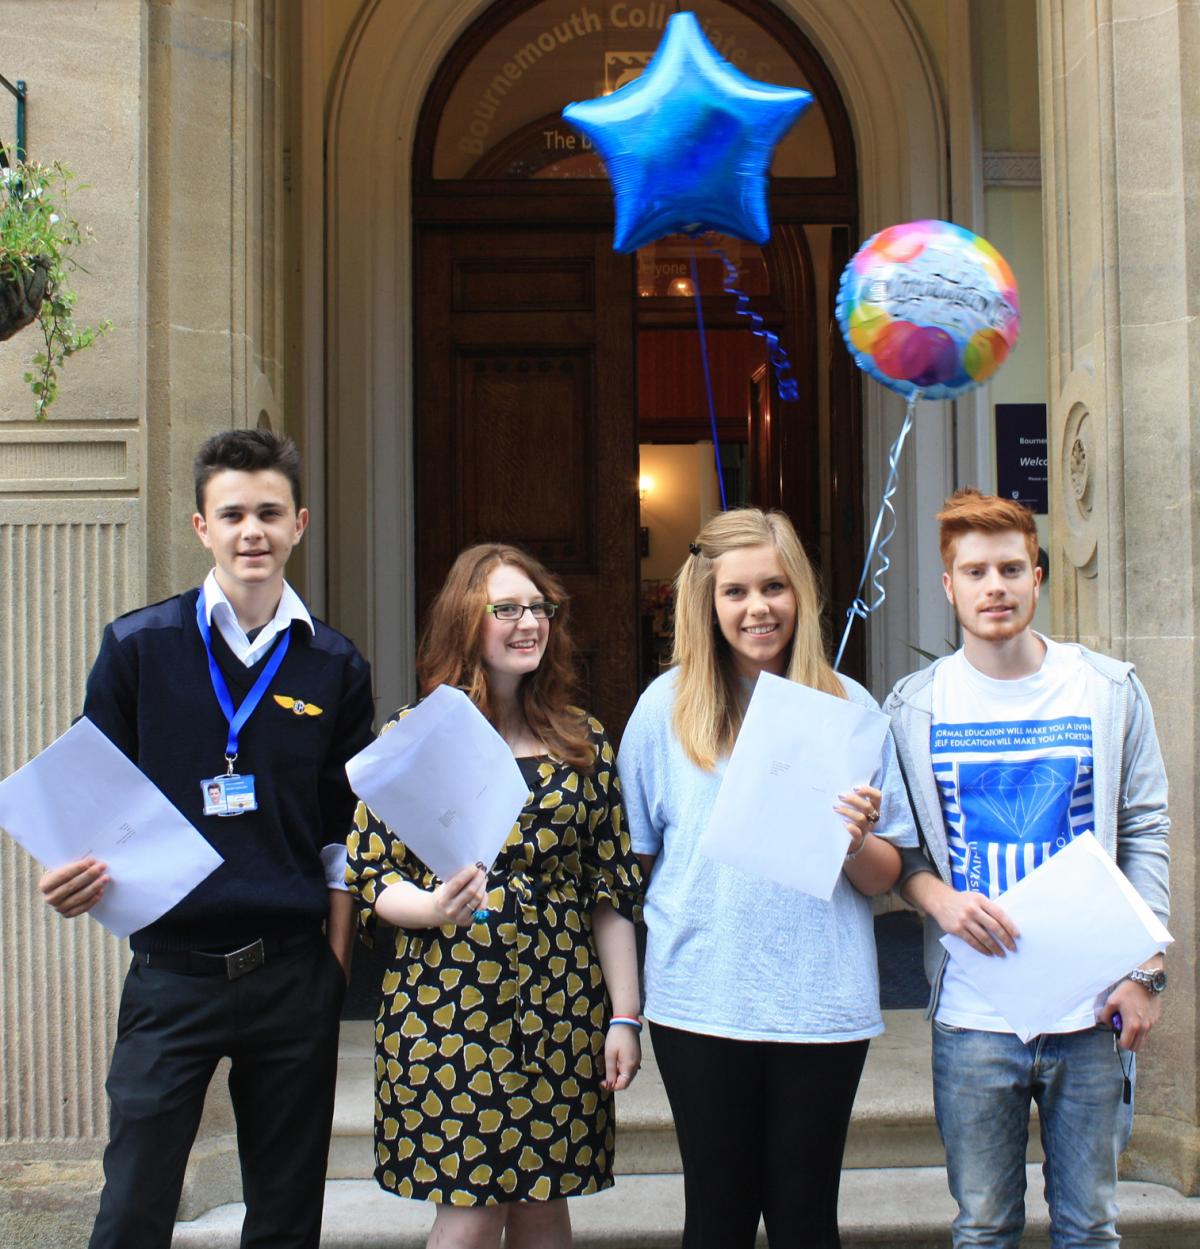 All our pictures from A-Level results day 2013. Bournemouth Collegiate School.